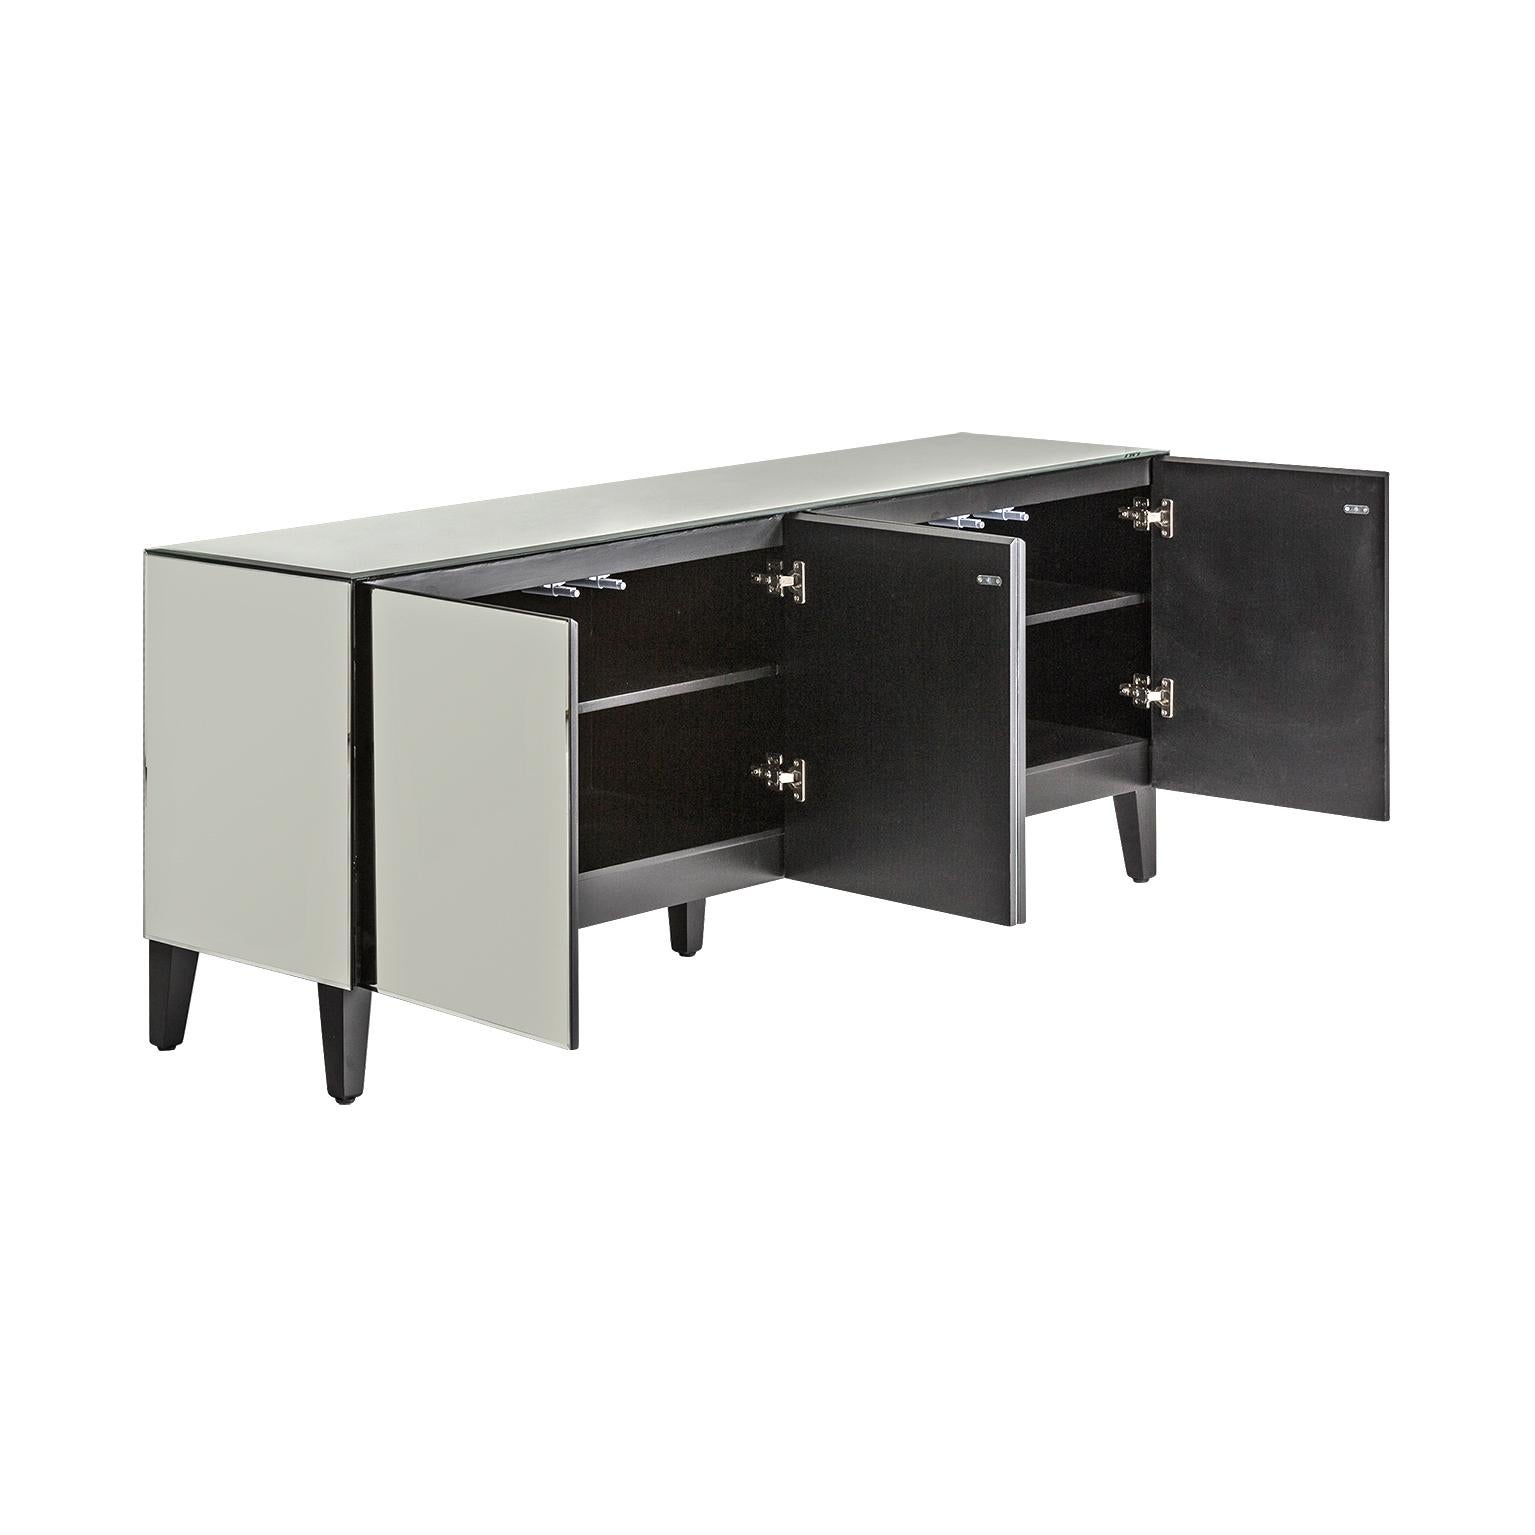 Sparkling and sophisticated all in beveled mirrored sideboard with black wooden and compas feet, four beveled mirrored doors with push-open system. Harmonious lines, graphic and original design.